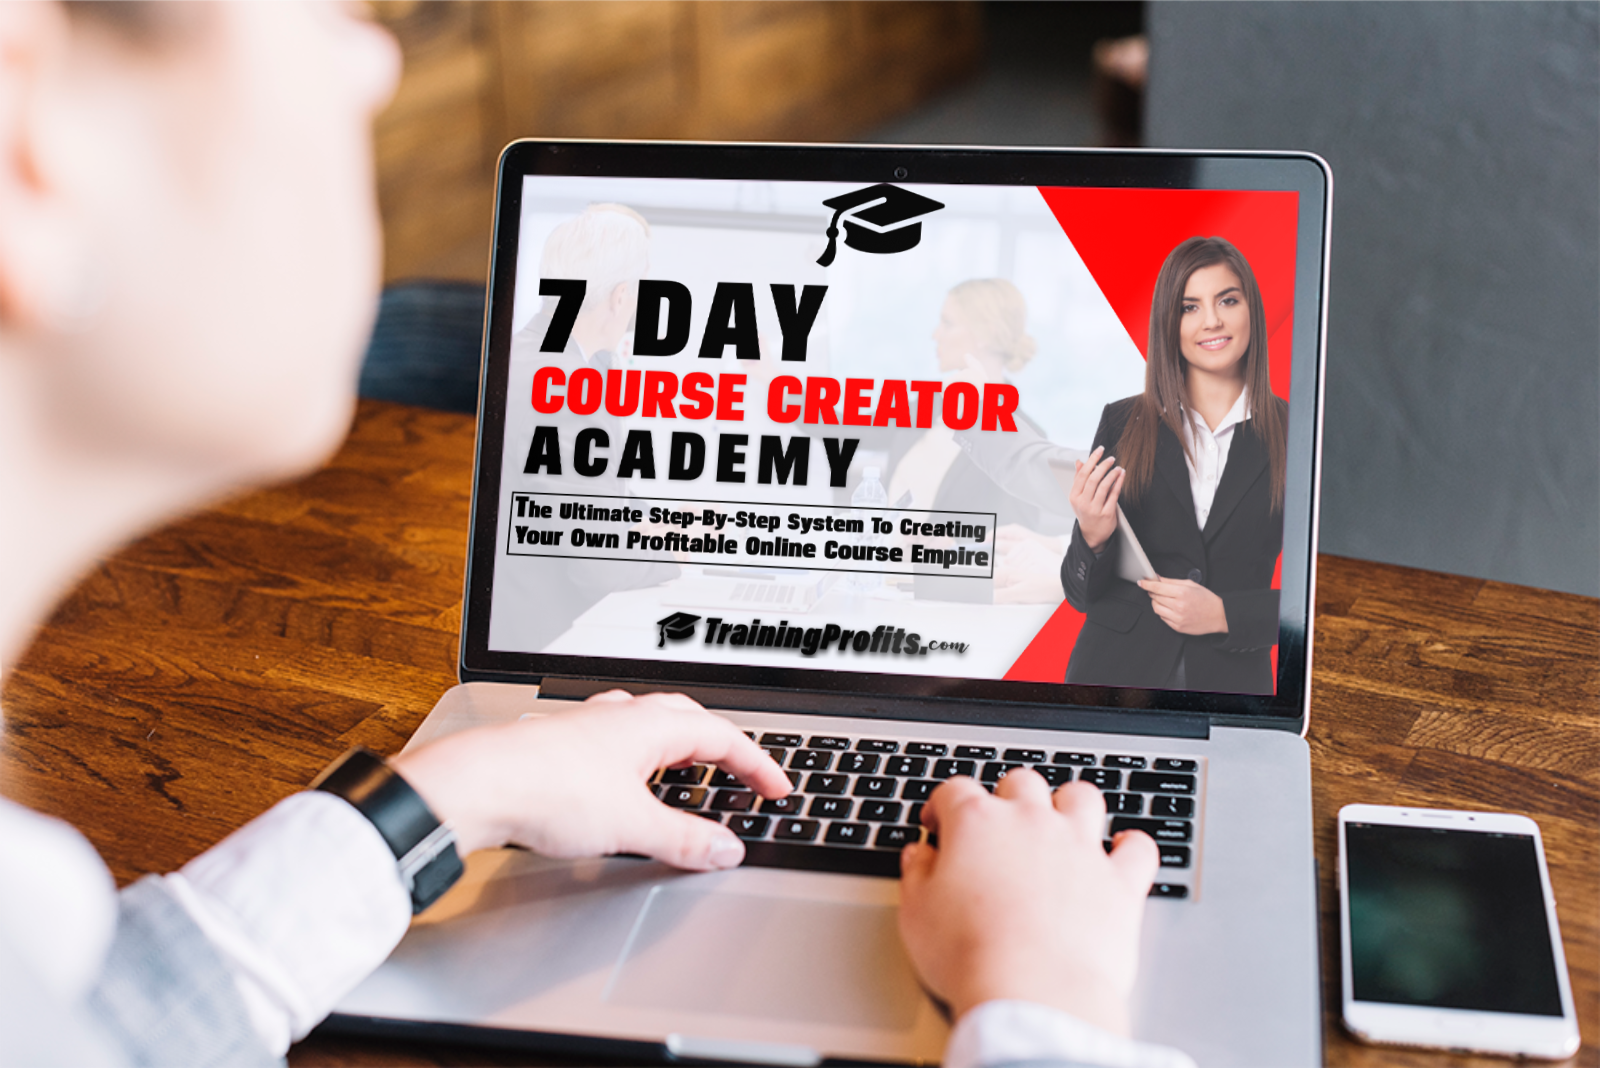 Training Profits Course – 7 Day Course Creator Academy